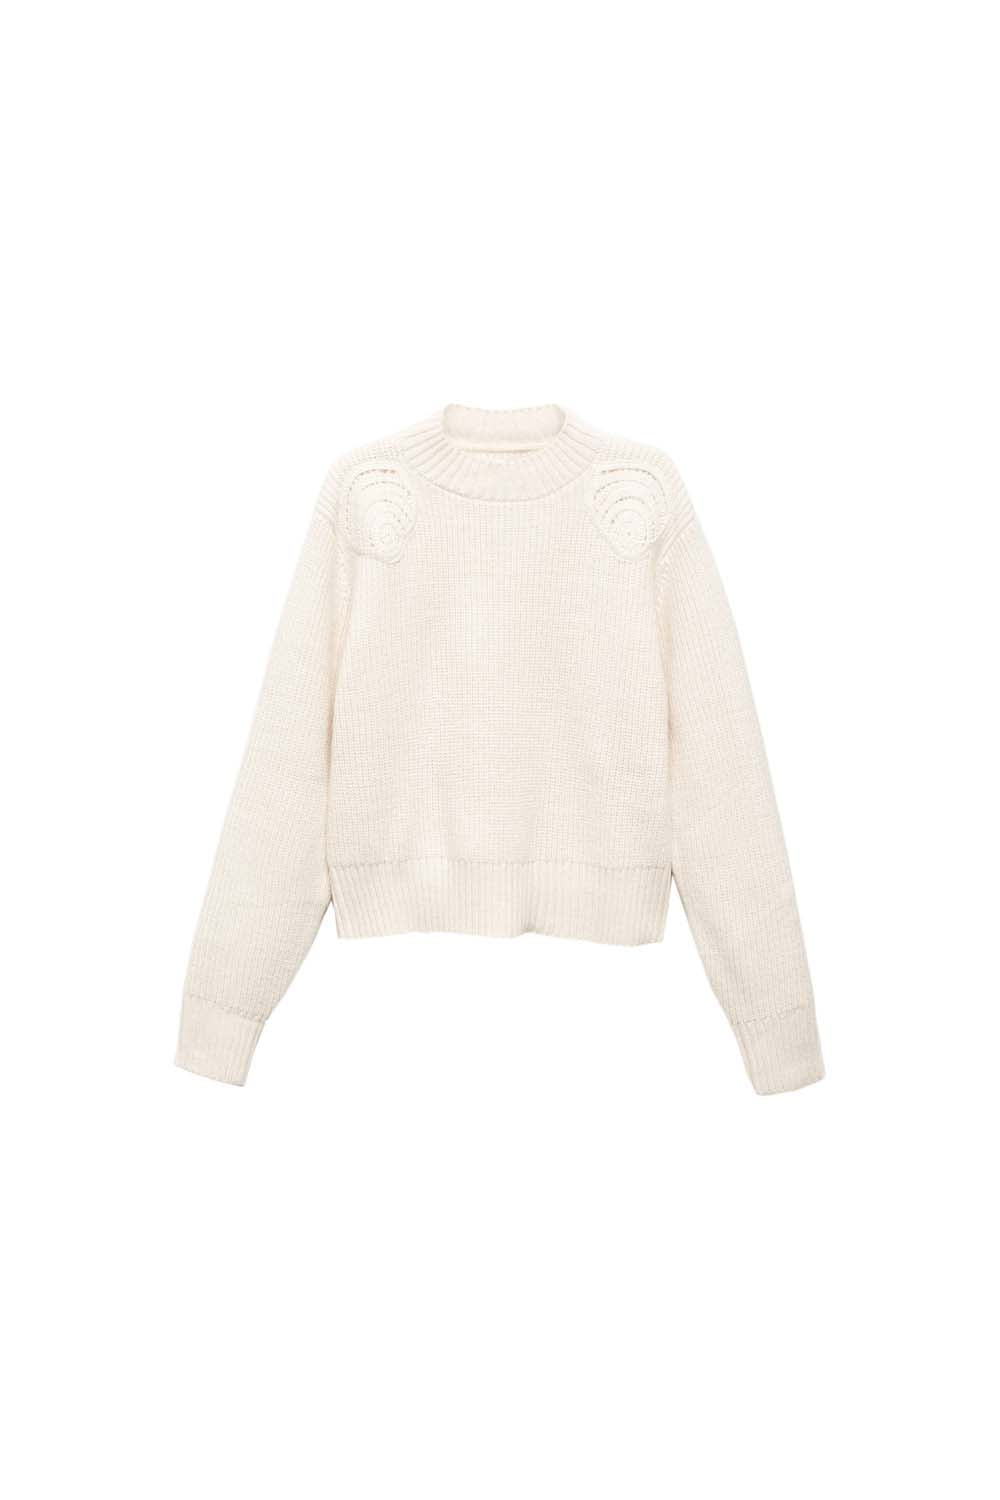 Mango Perkins neck sweater with shoulder detail 8 Shaws Department Stores